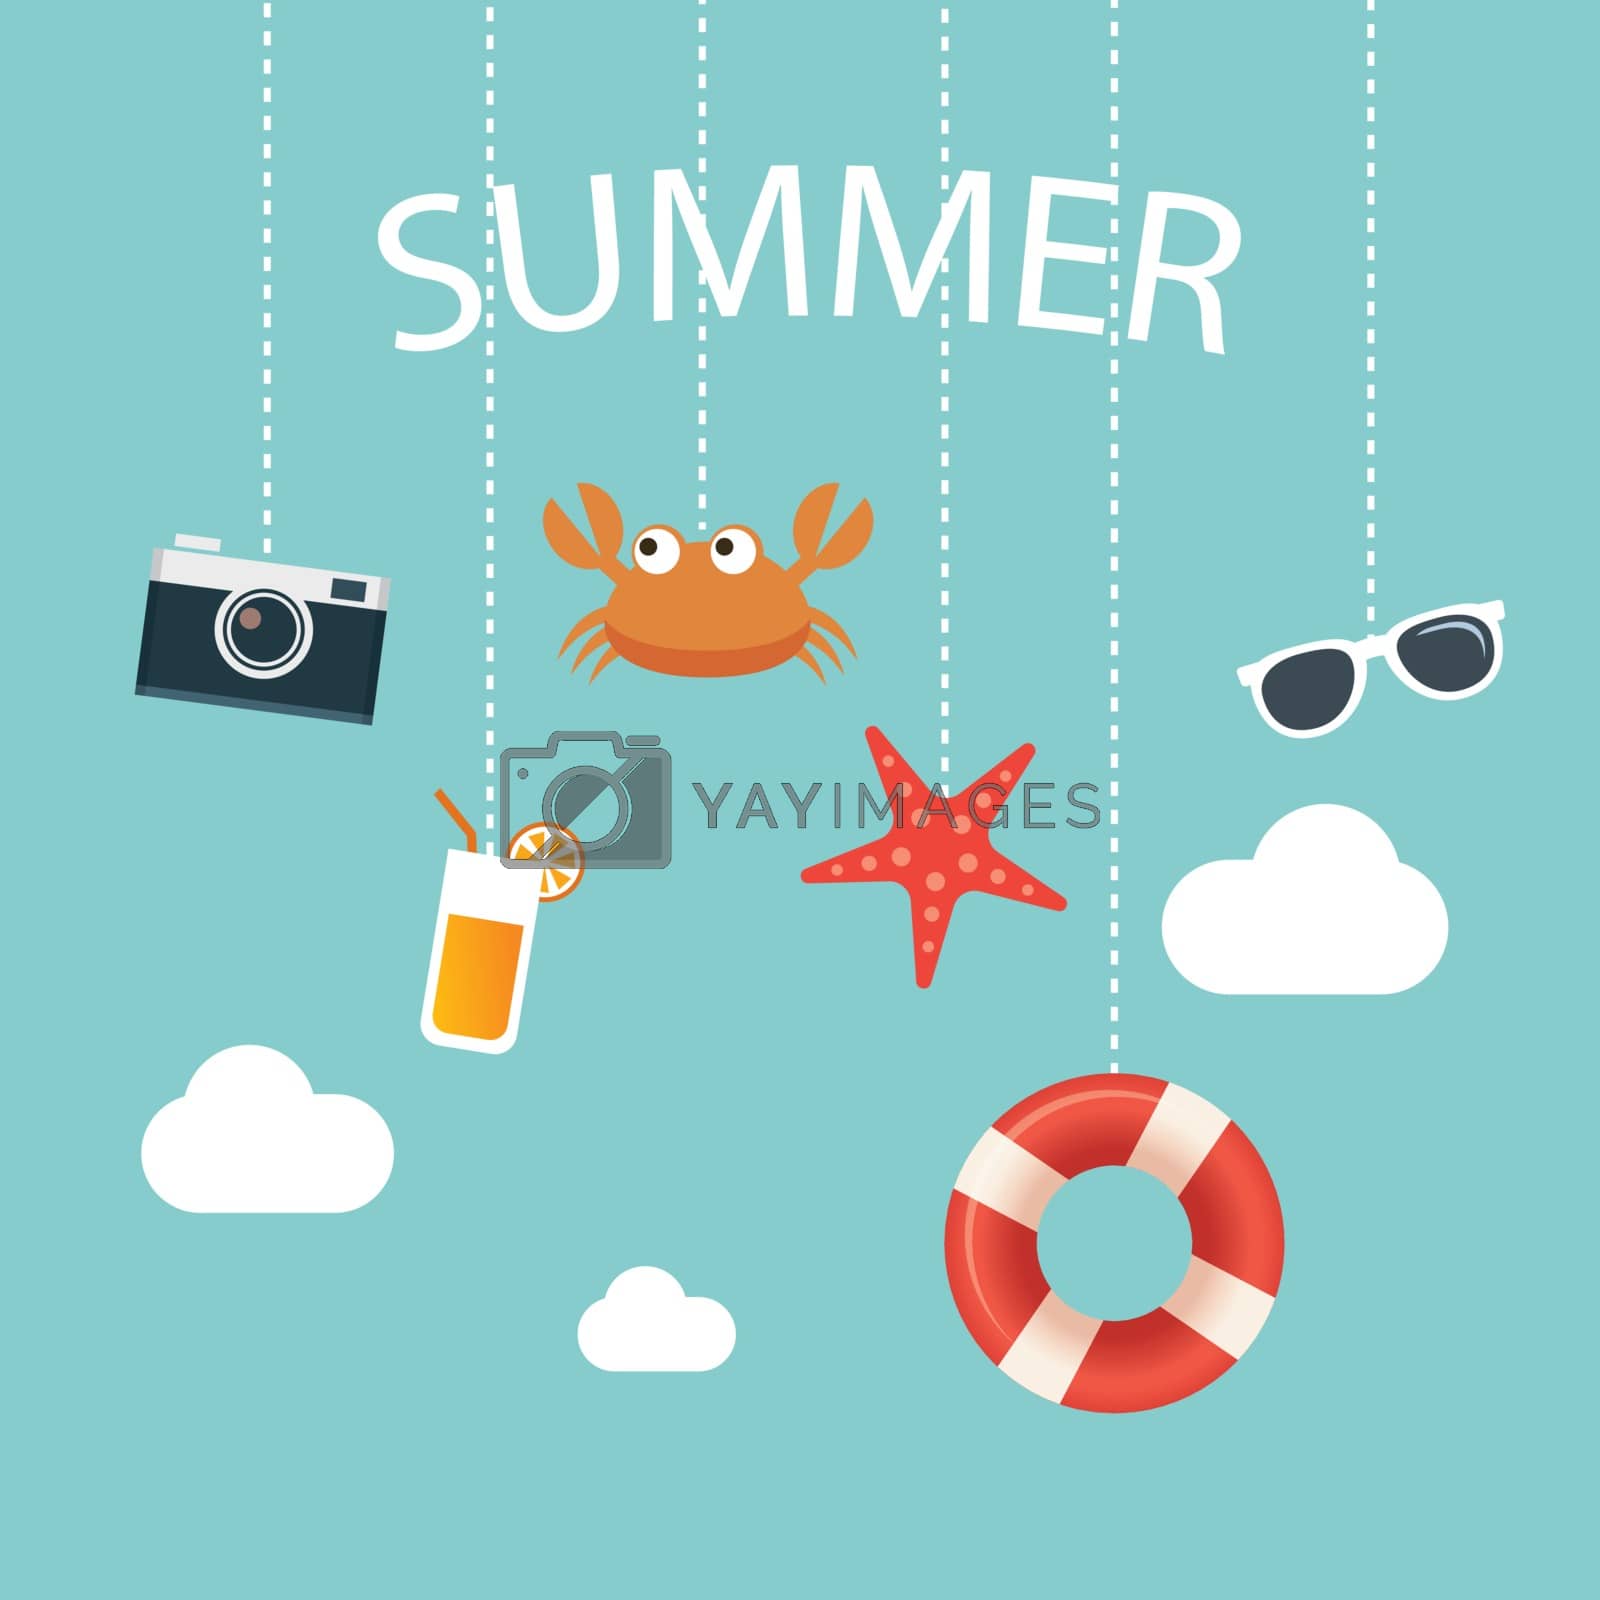 Royalty free image of summertime background with hanging summer icon by kaisorn